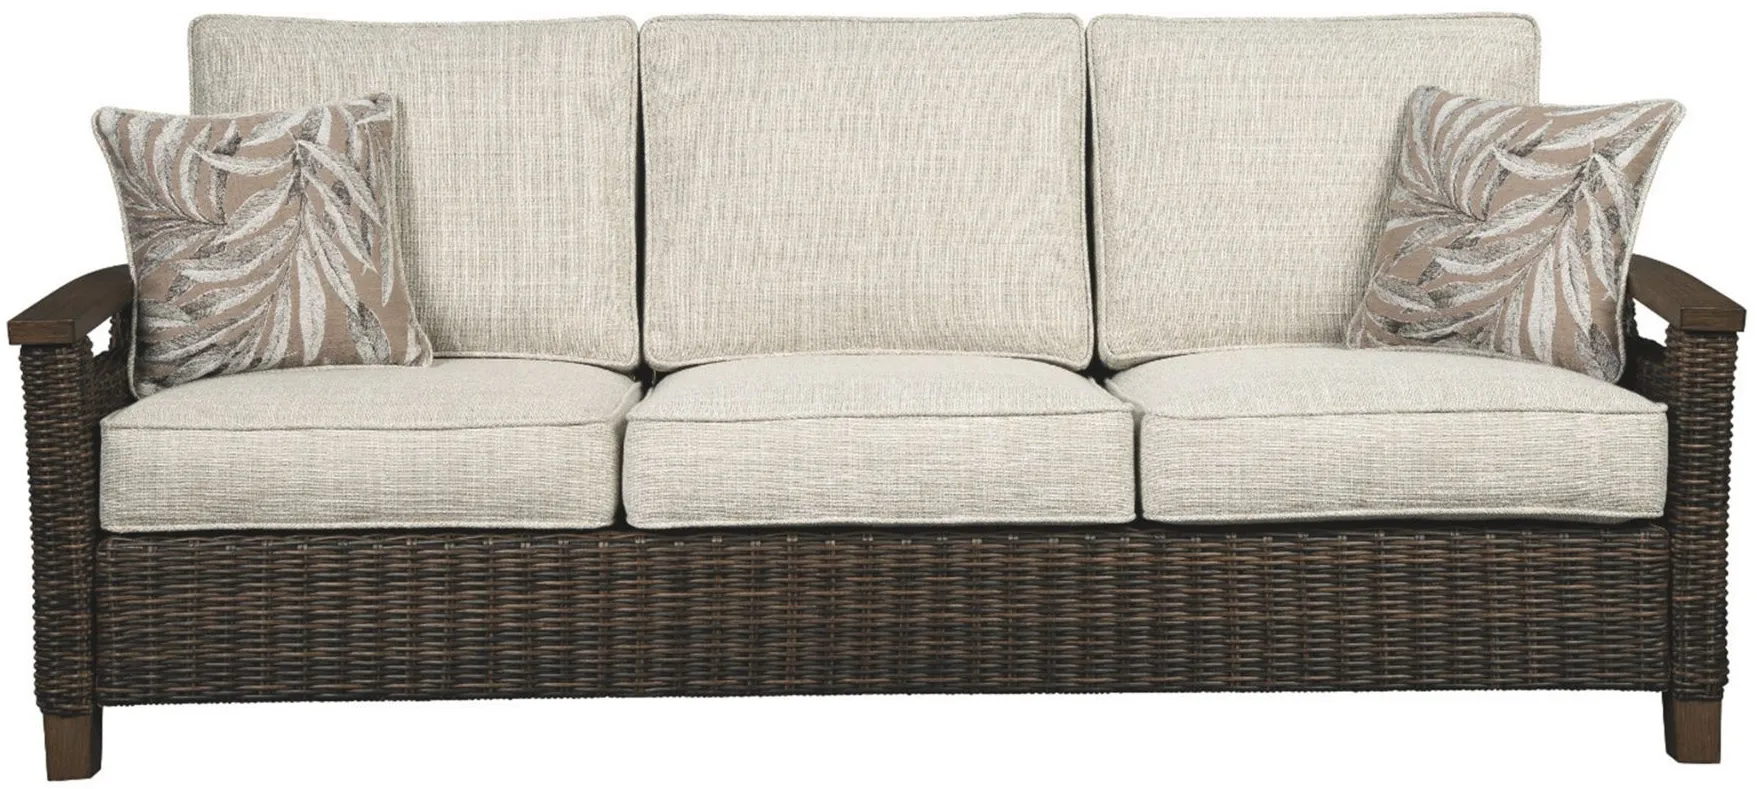 Paradise Trail Outdoor Sofa in Medium Brown by Ashley Furniture